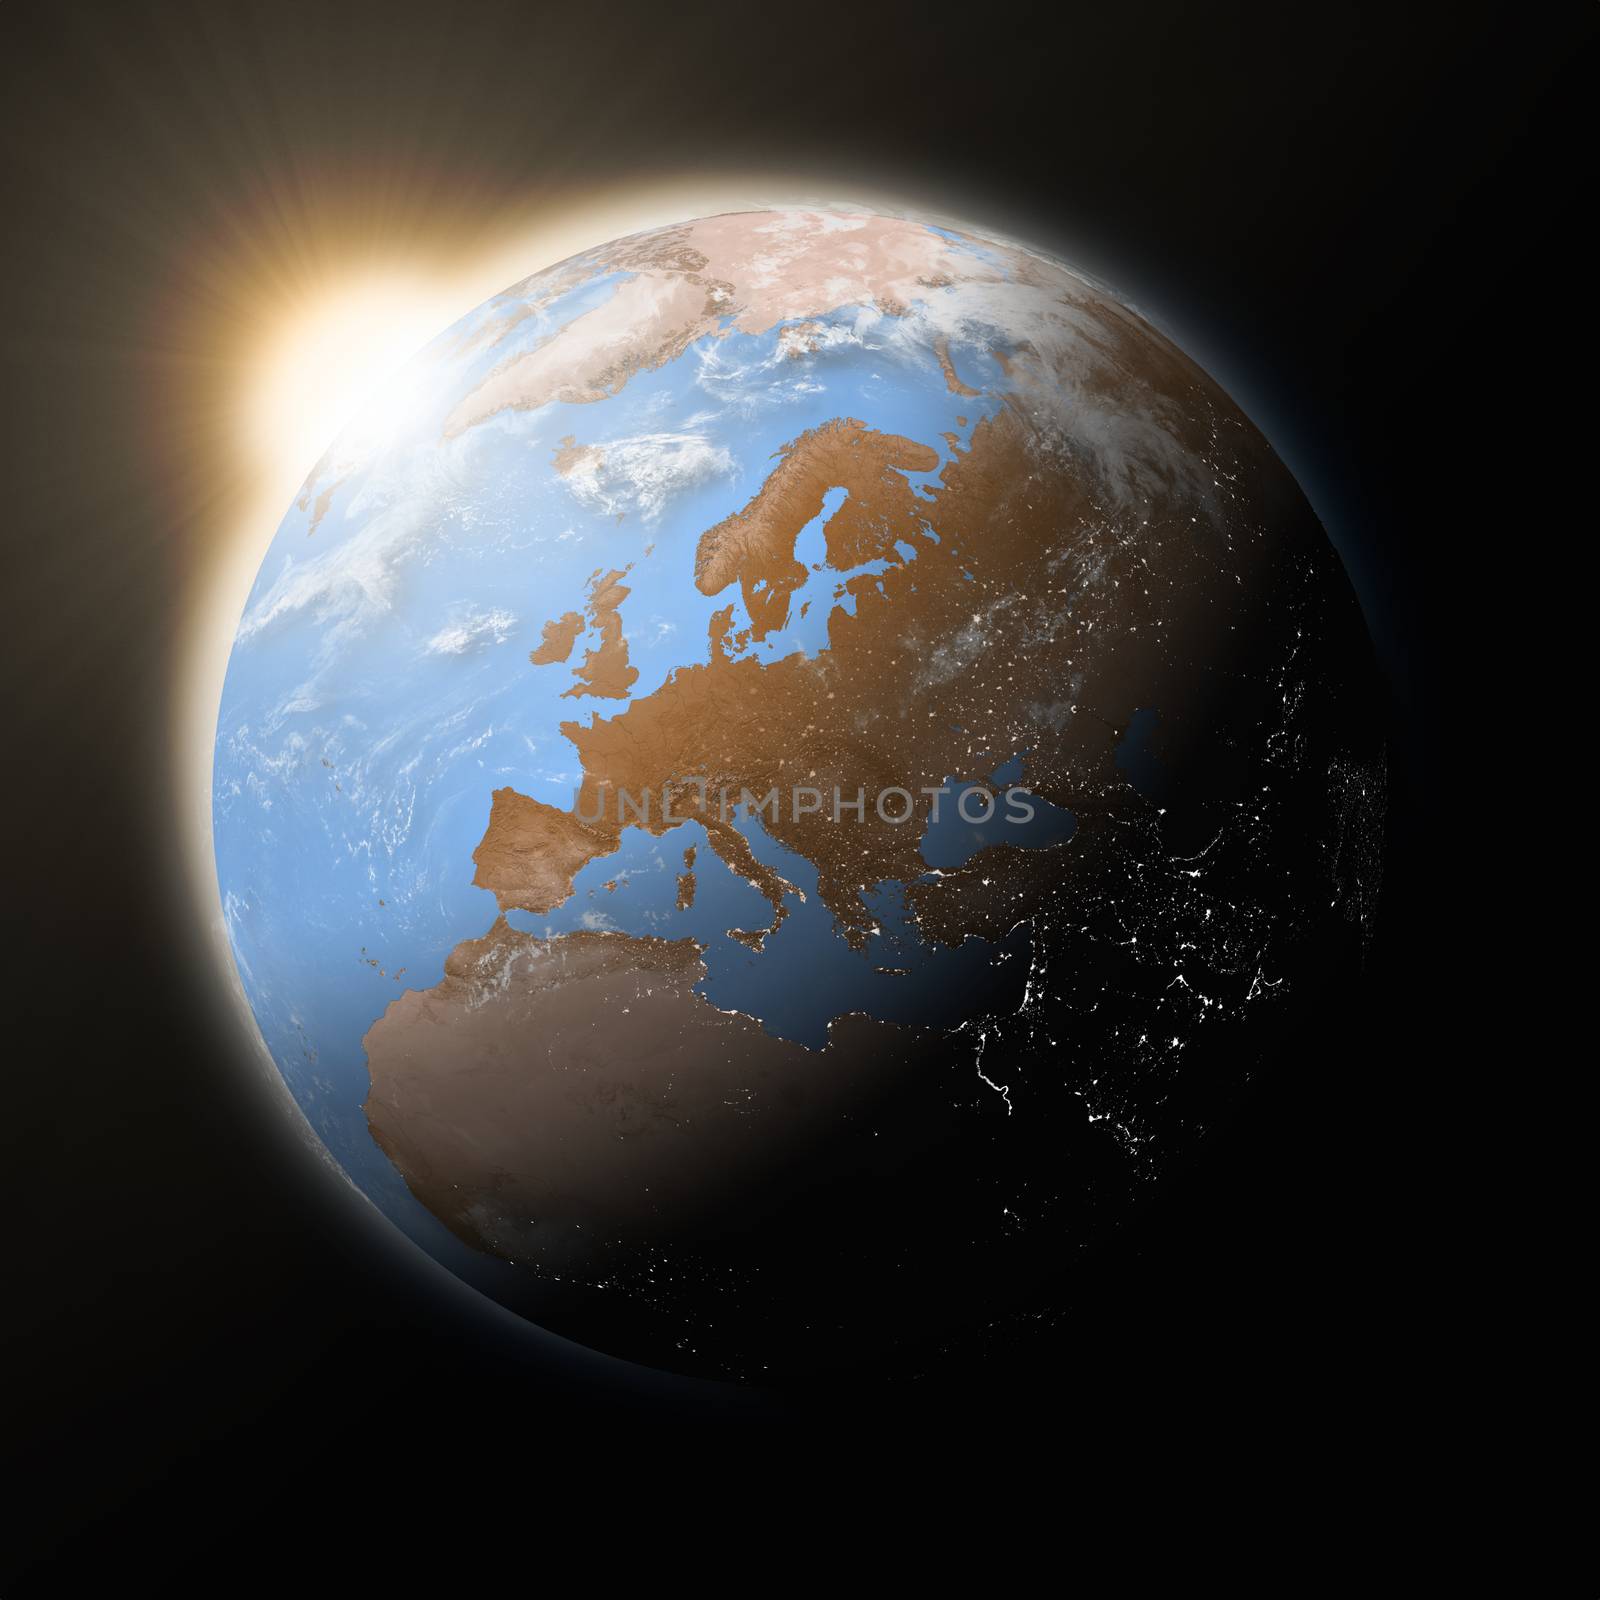 Sun over Europe on planet Earth by Harvepino